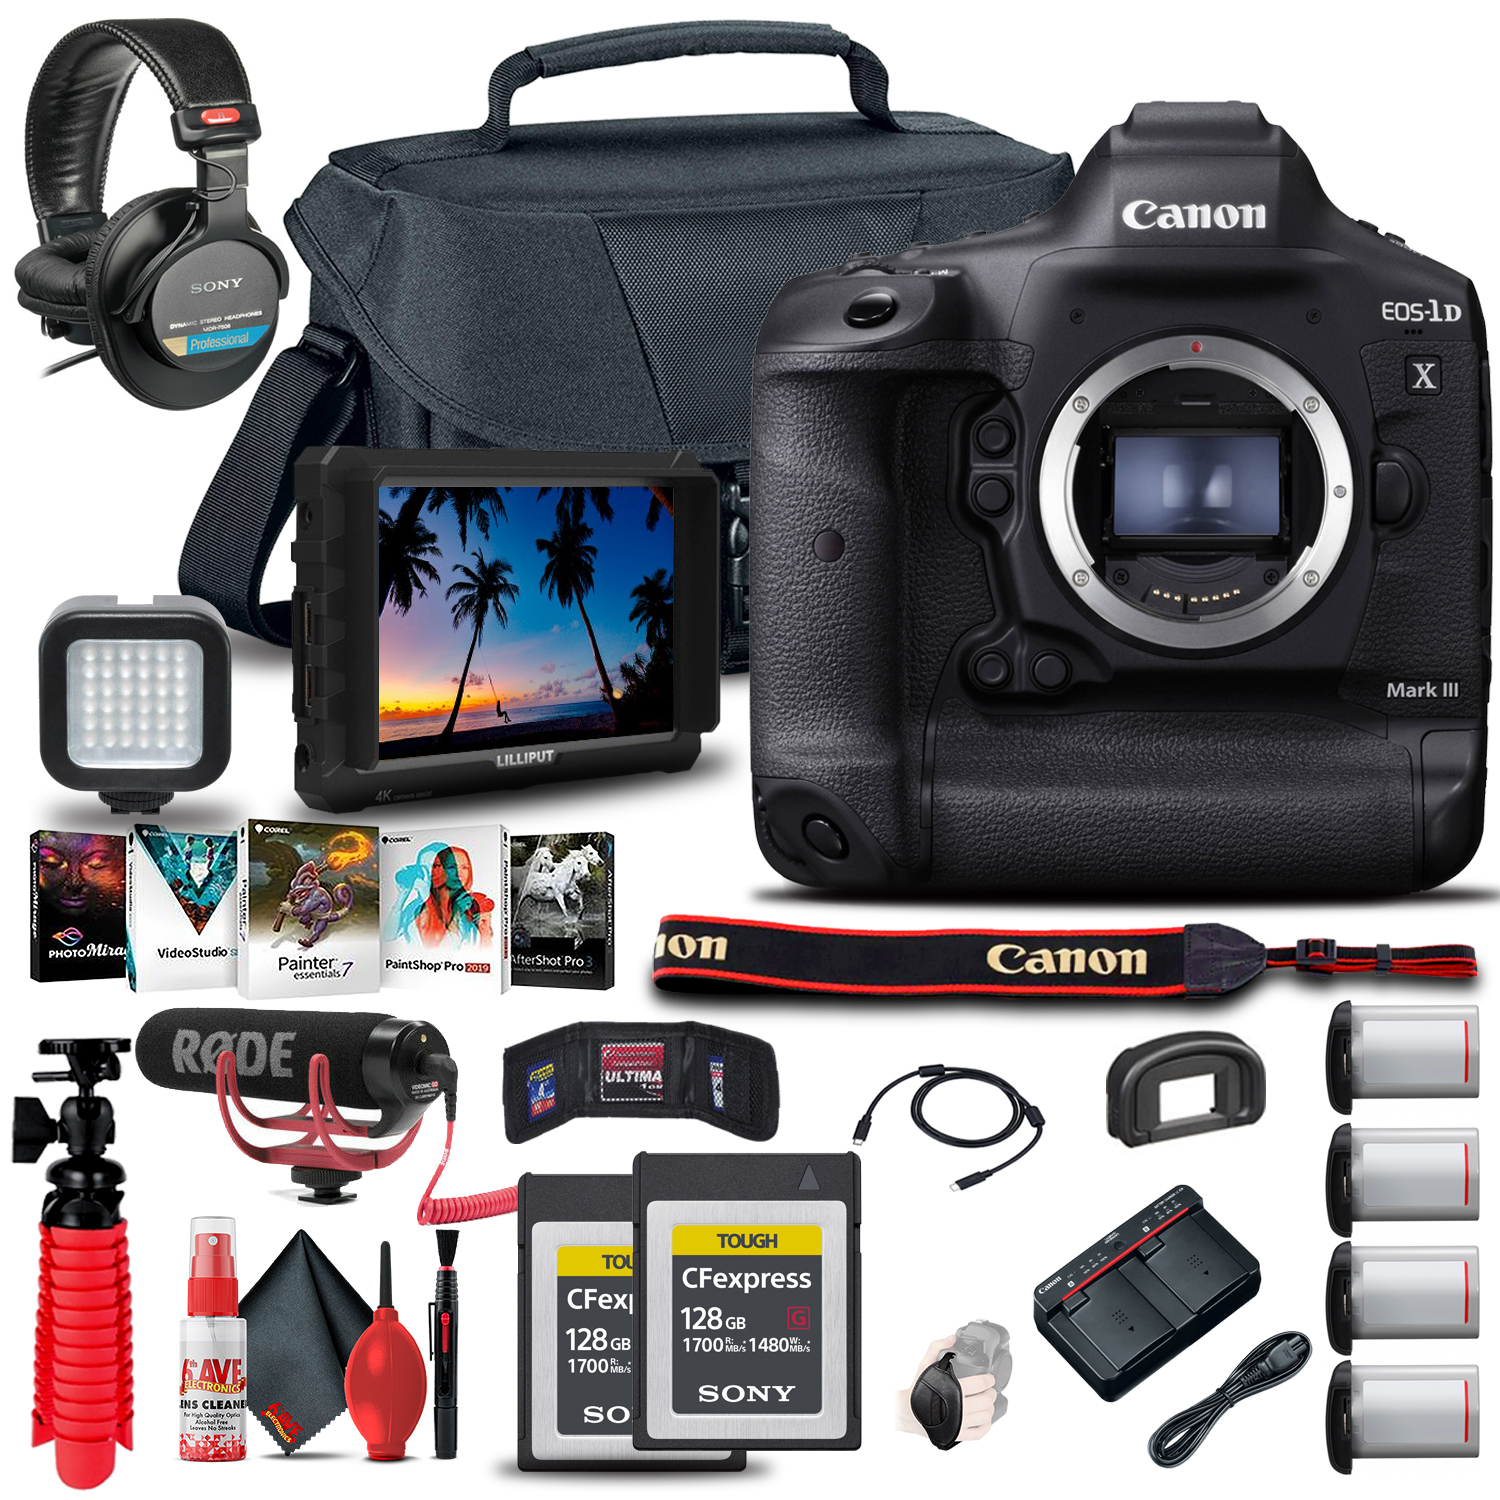 Canon EOS-1D X Mark III DSLR Camera (Body Only) (3829C002) + 4K Monitor + More - image 1 of 8